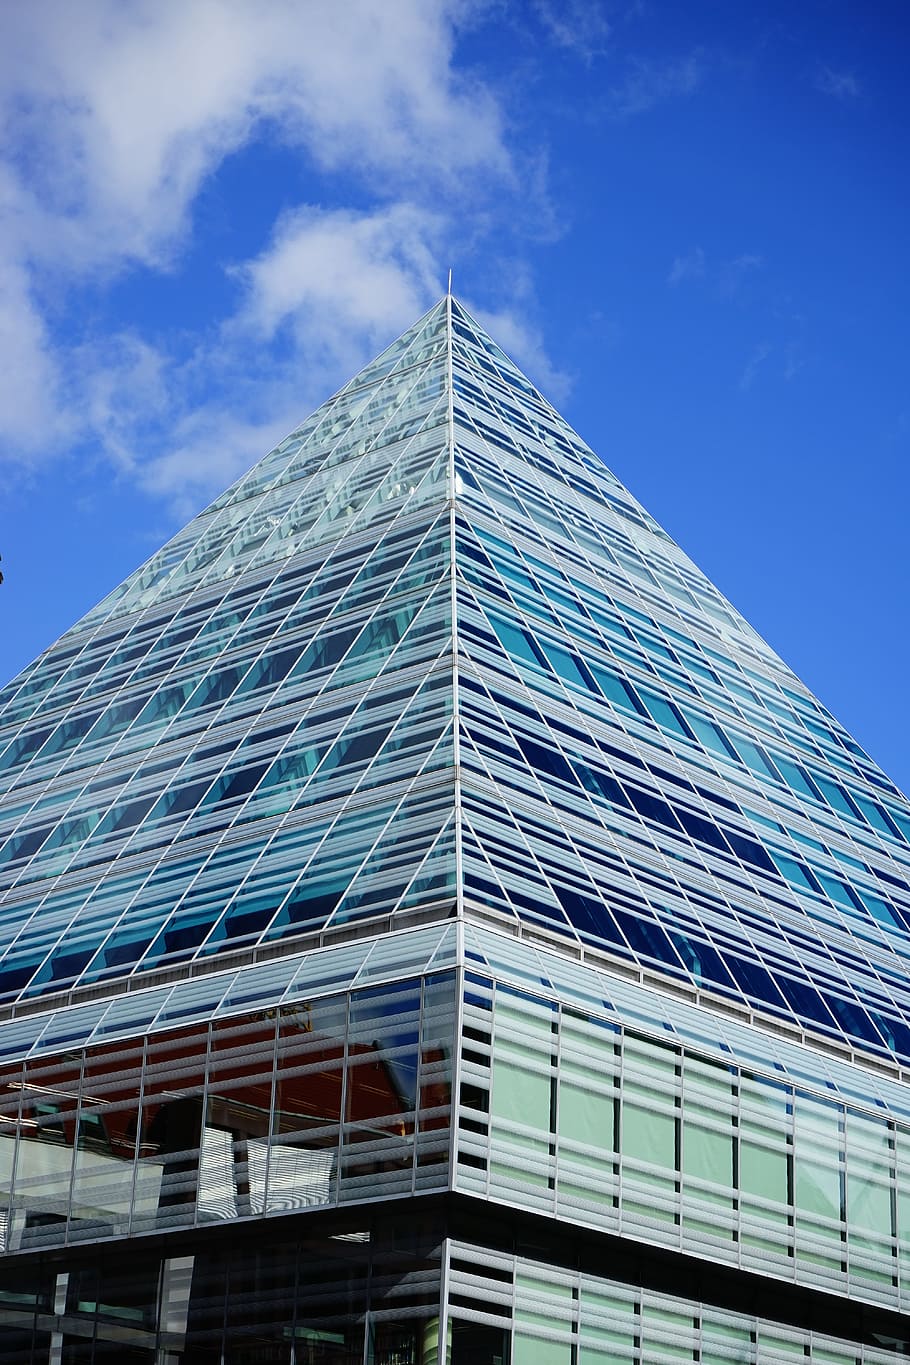 City, Library, Building, Ulm, Glass, city library, glazing, home, glass pyramid, architecture